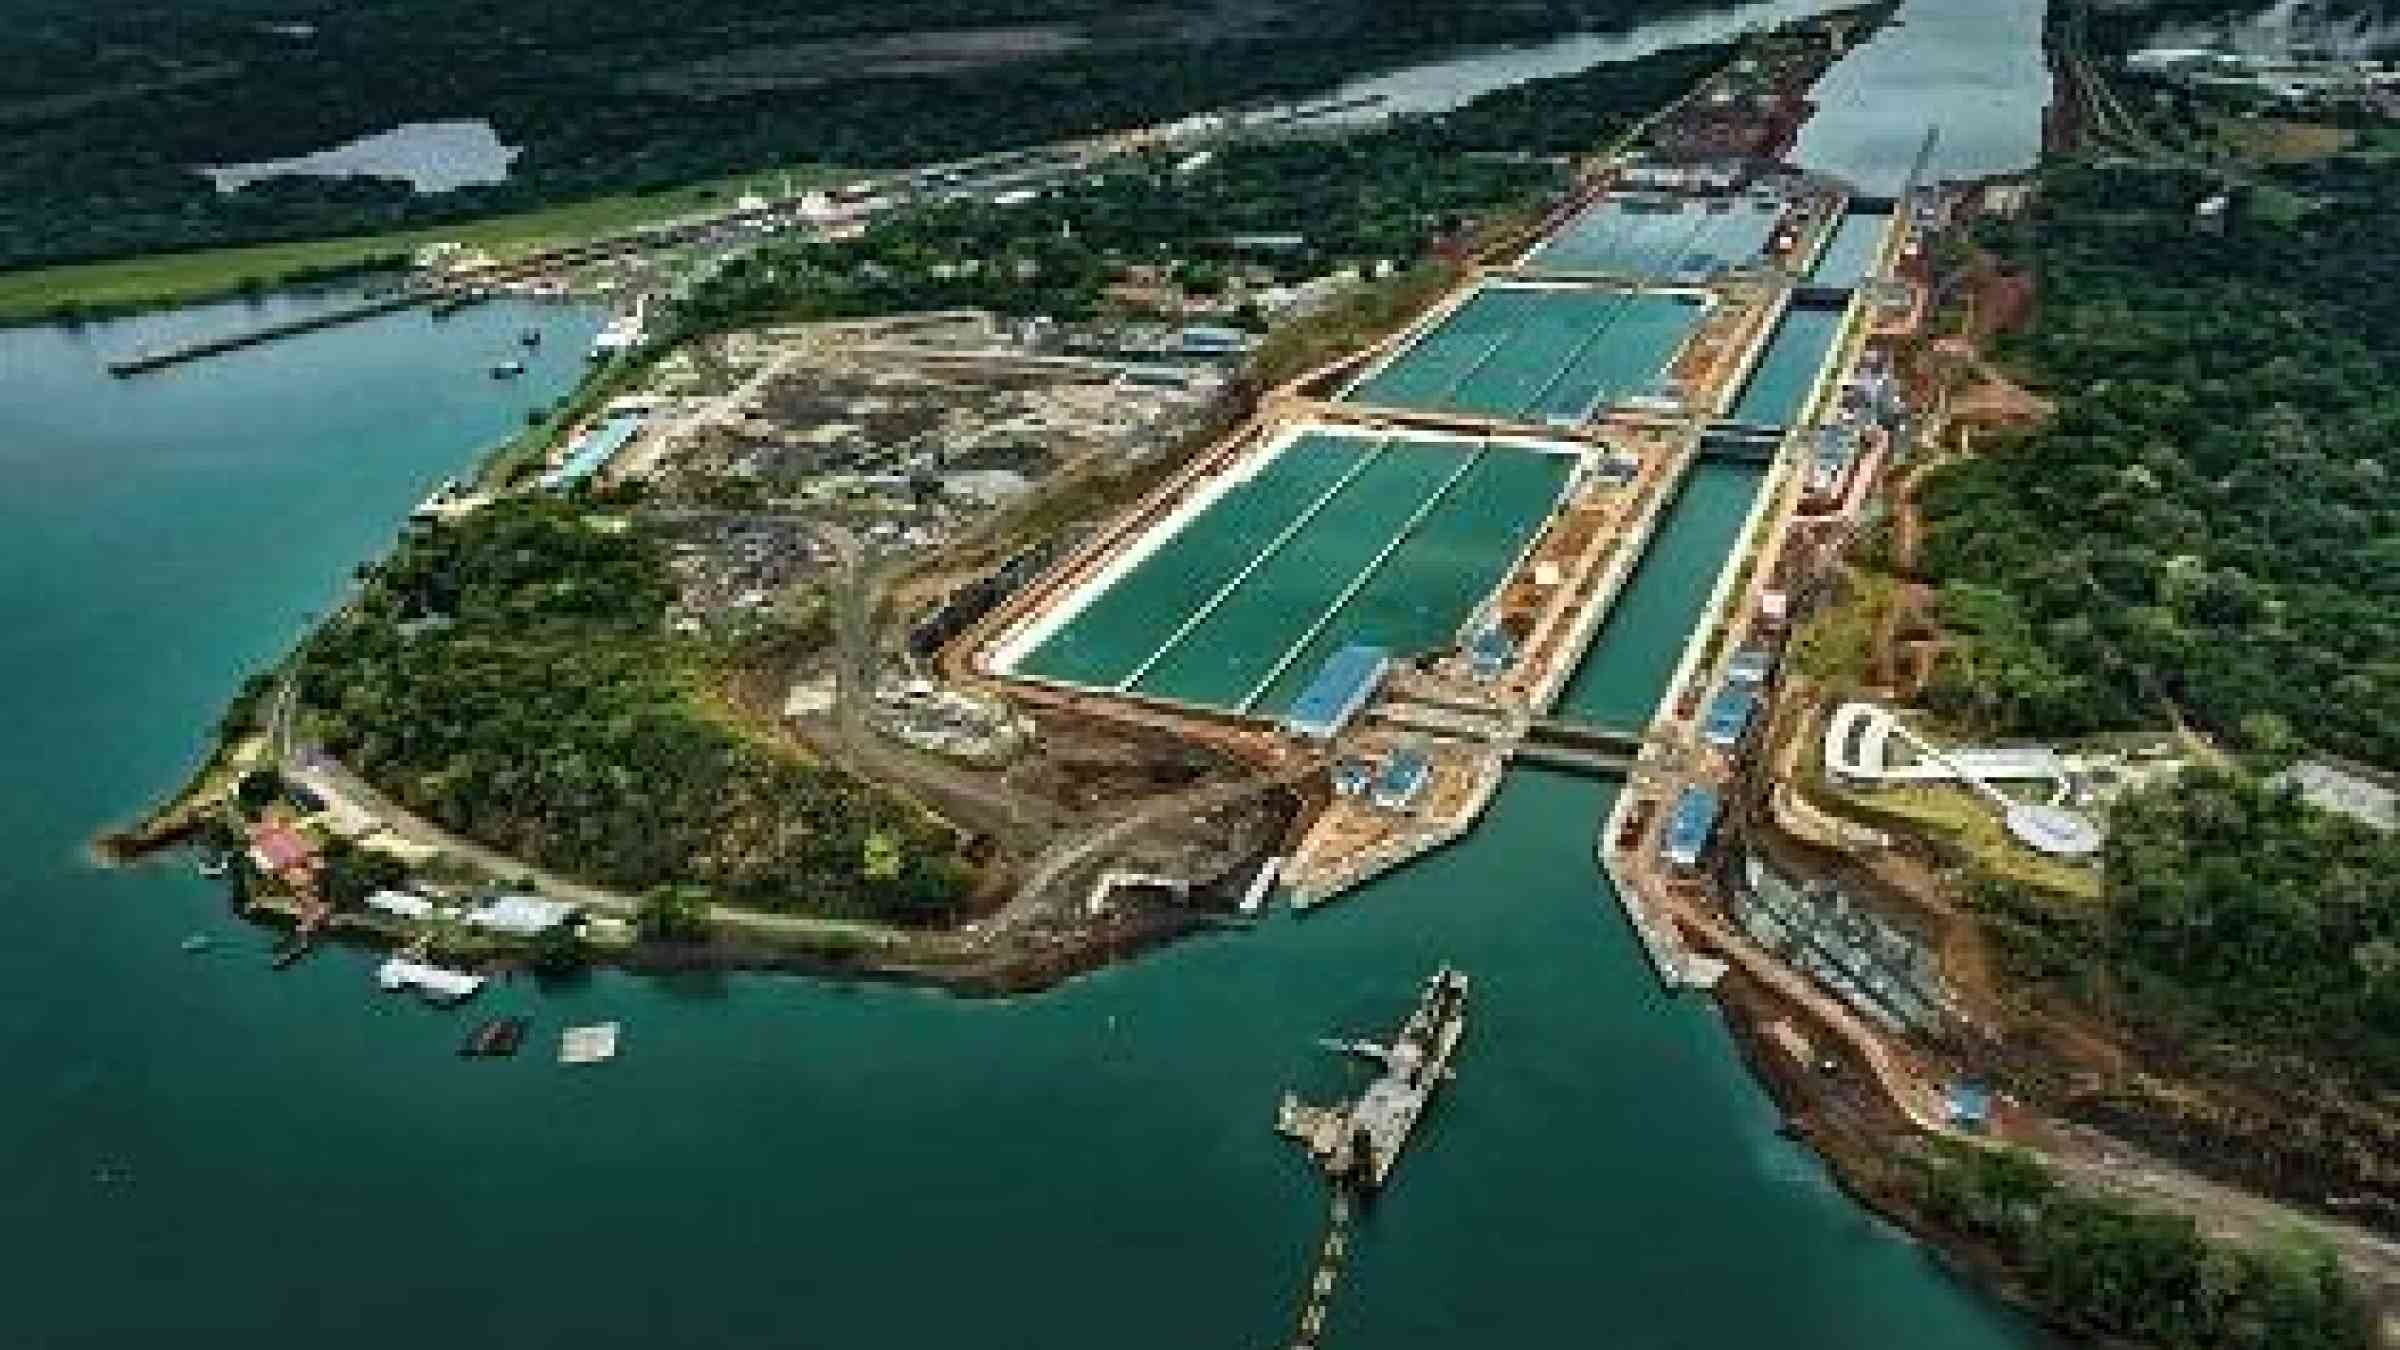 The expanded Panama Canal is reducing water use thanks to its new system of locks and basins, thereby lowering the risks posed by drought (Photo: Panama Canal Authority)